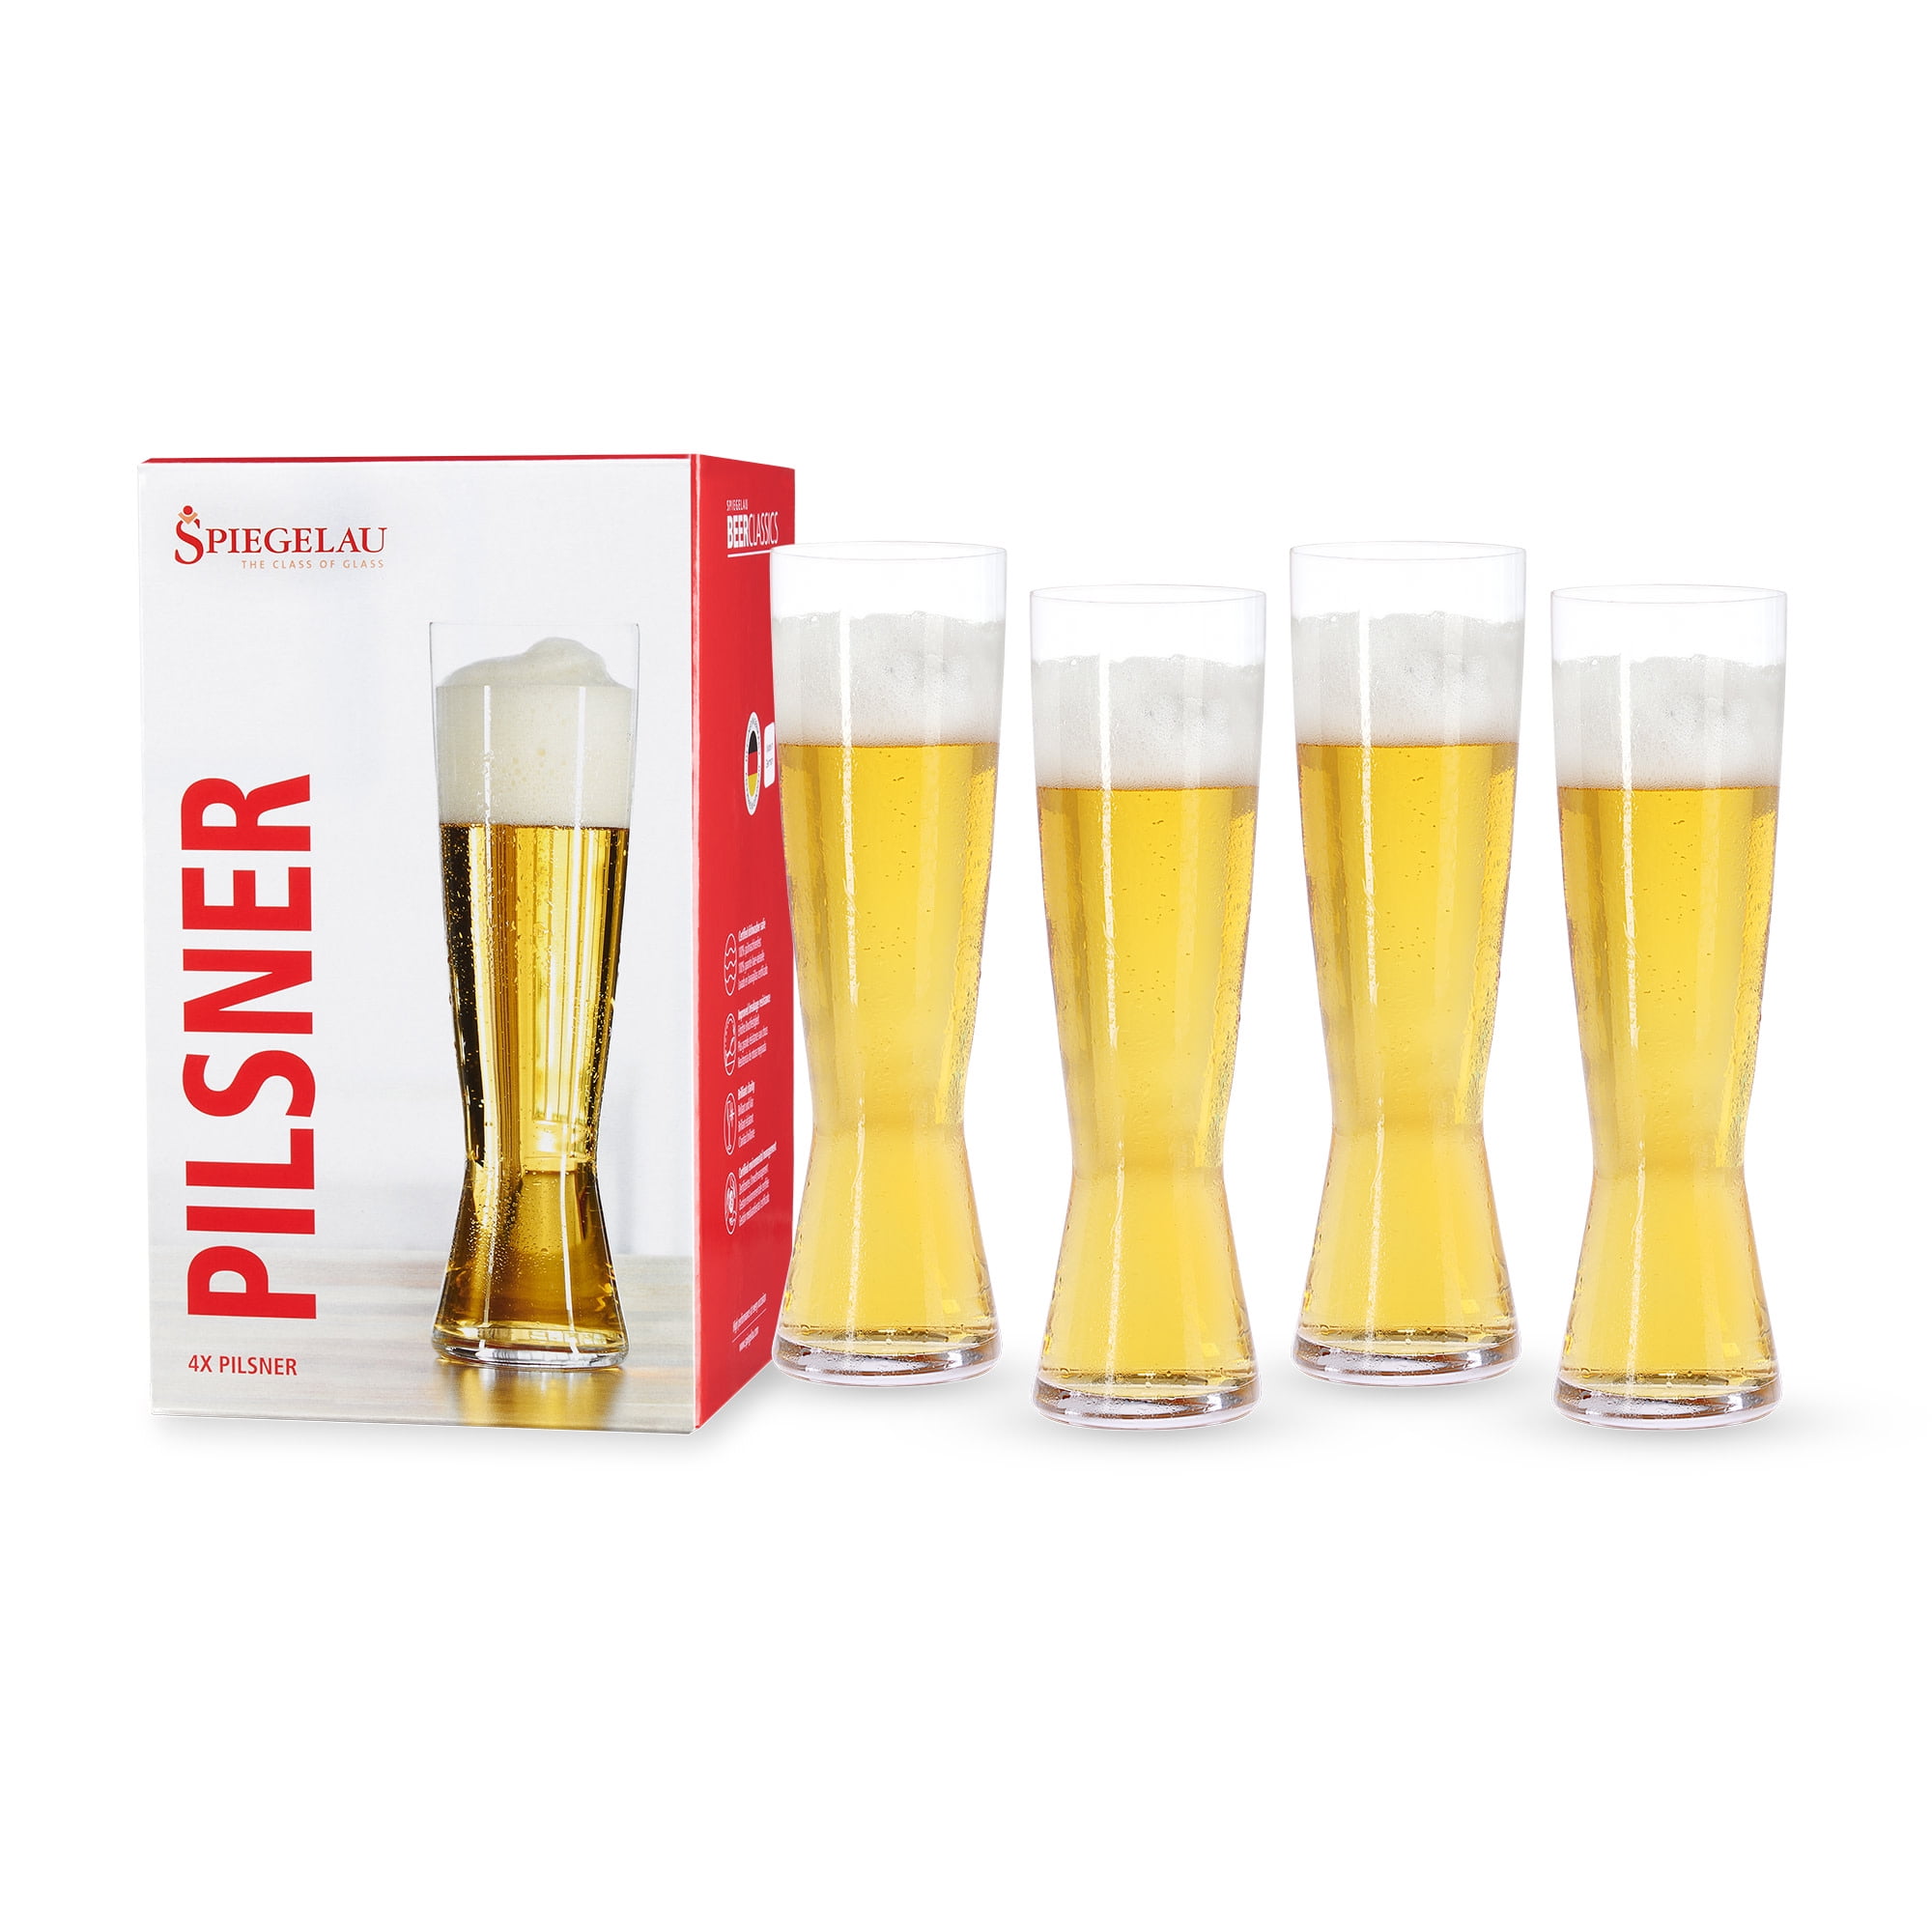 6 NEW Spiegelau Beer Classics 19.75 oz Lager Lead Free Crystal Glasses 